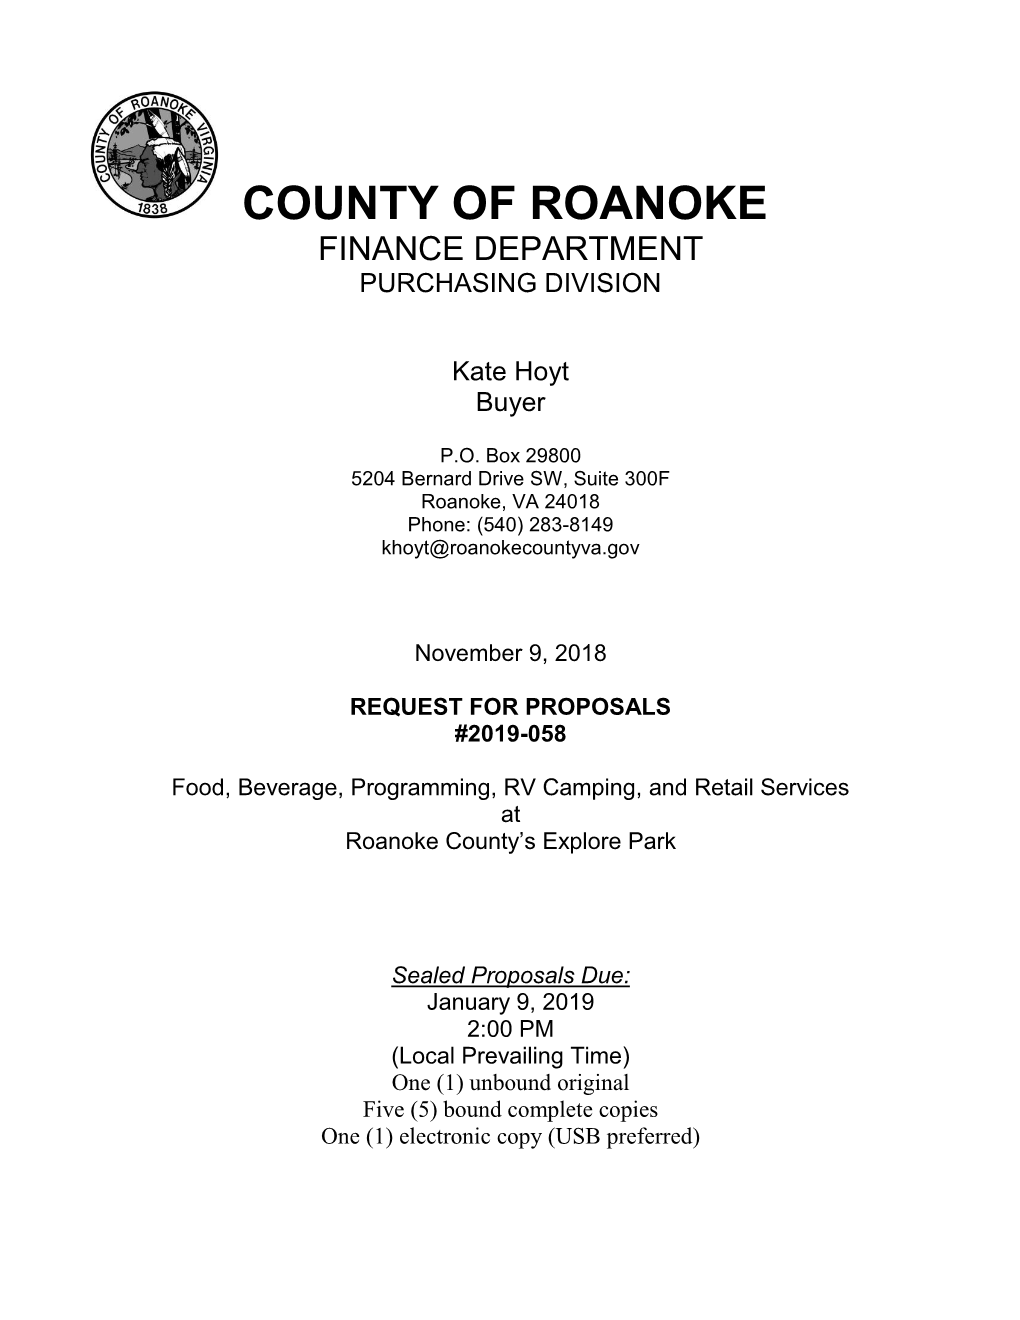 County of Roanoke Finance Department Purchasing Division